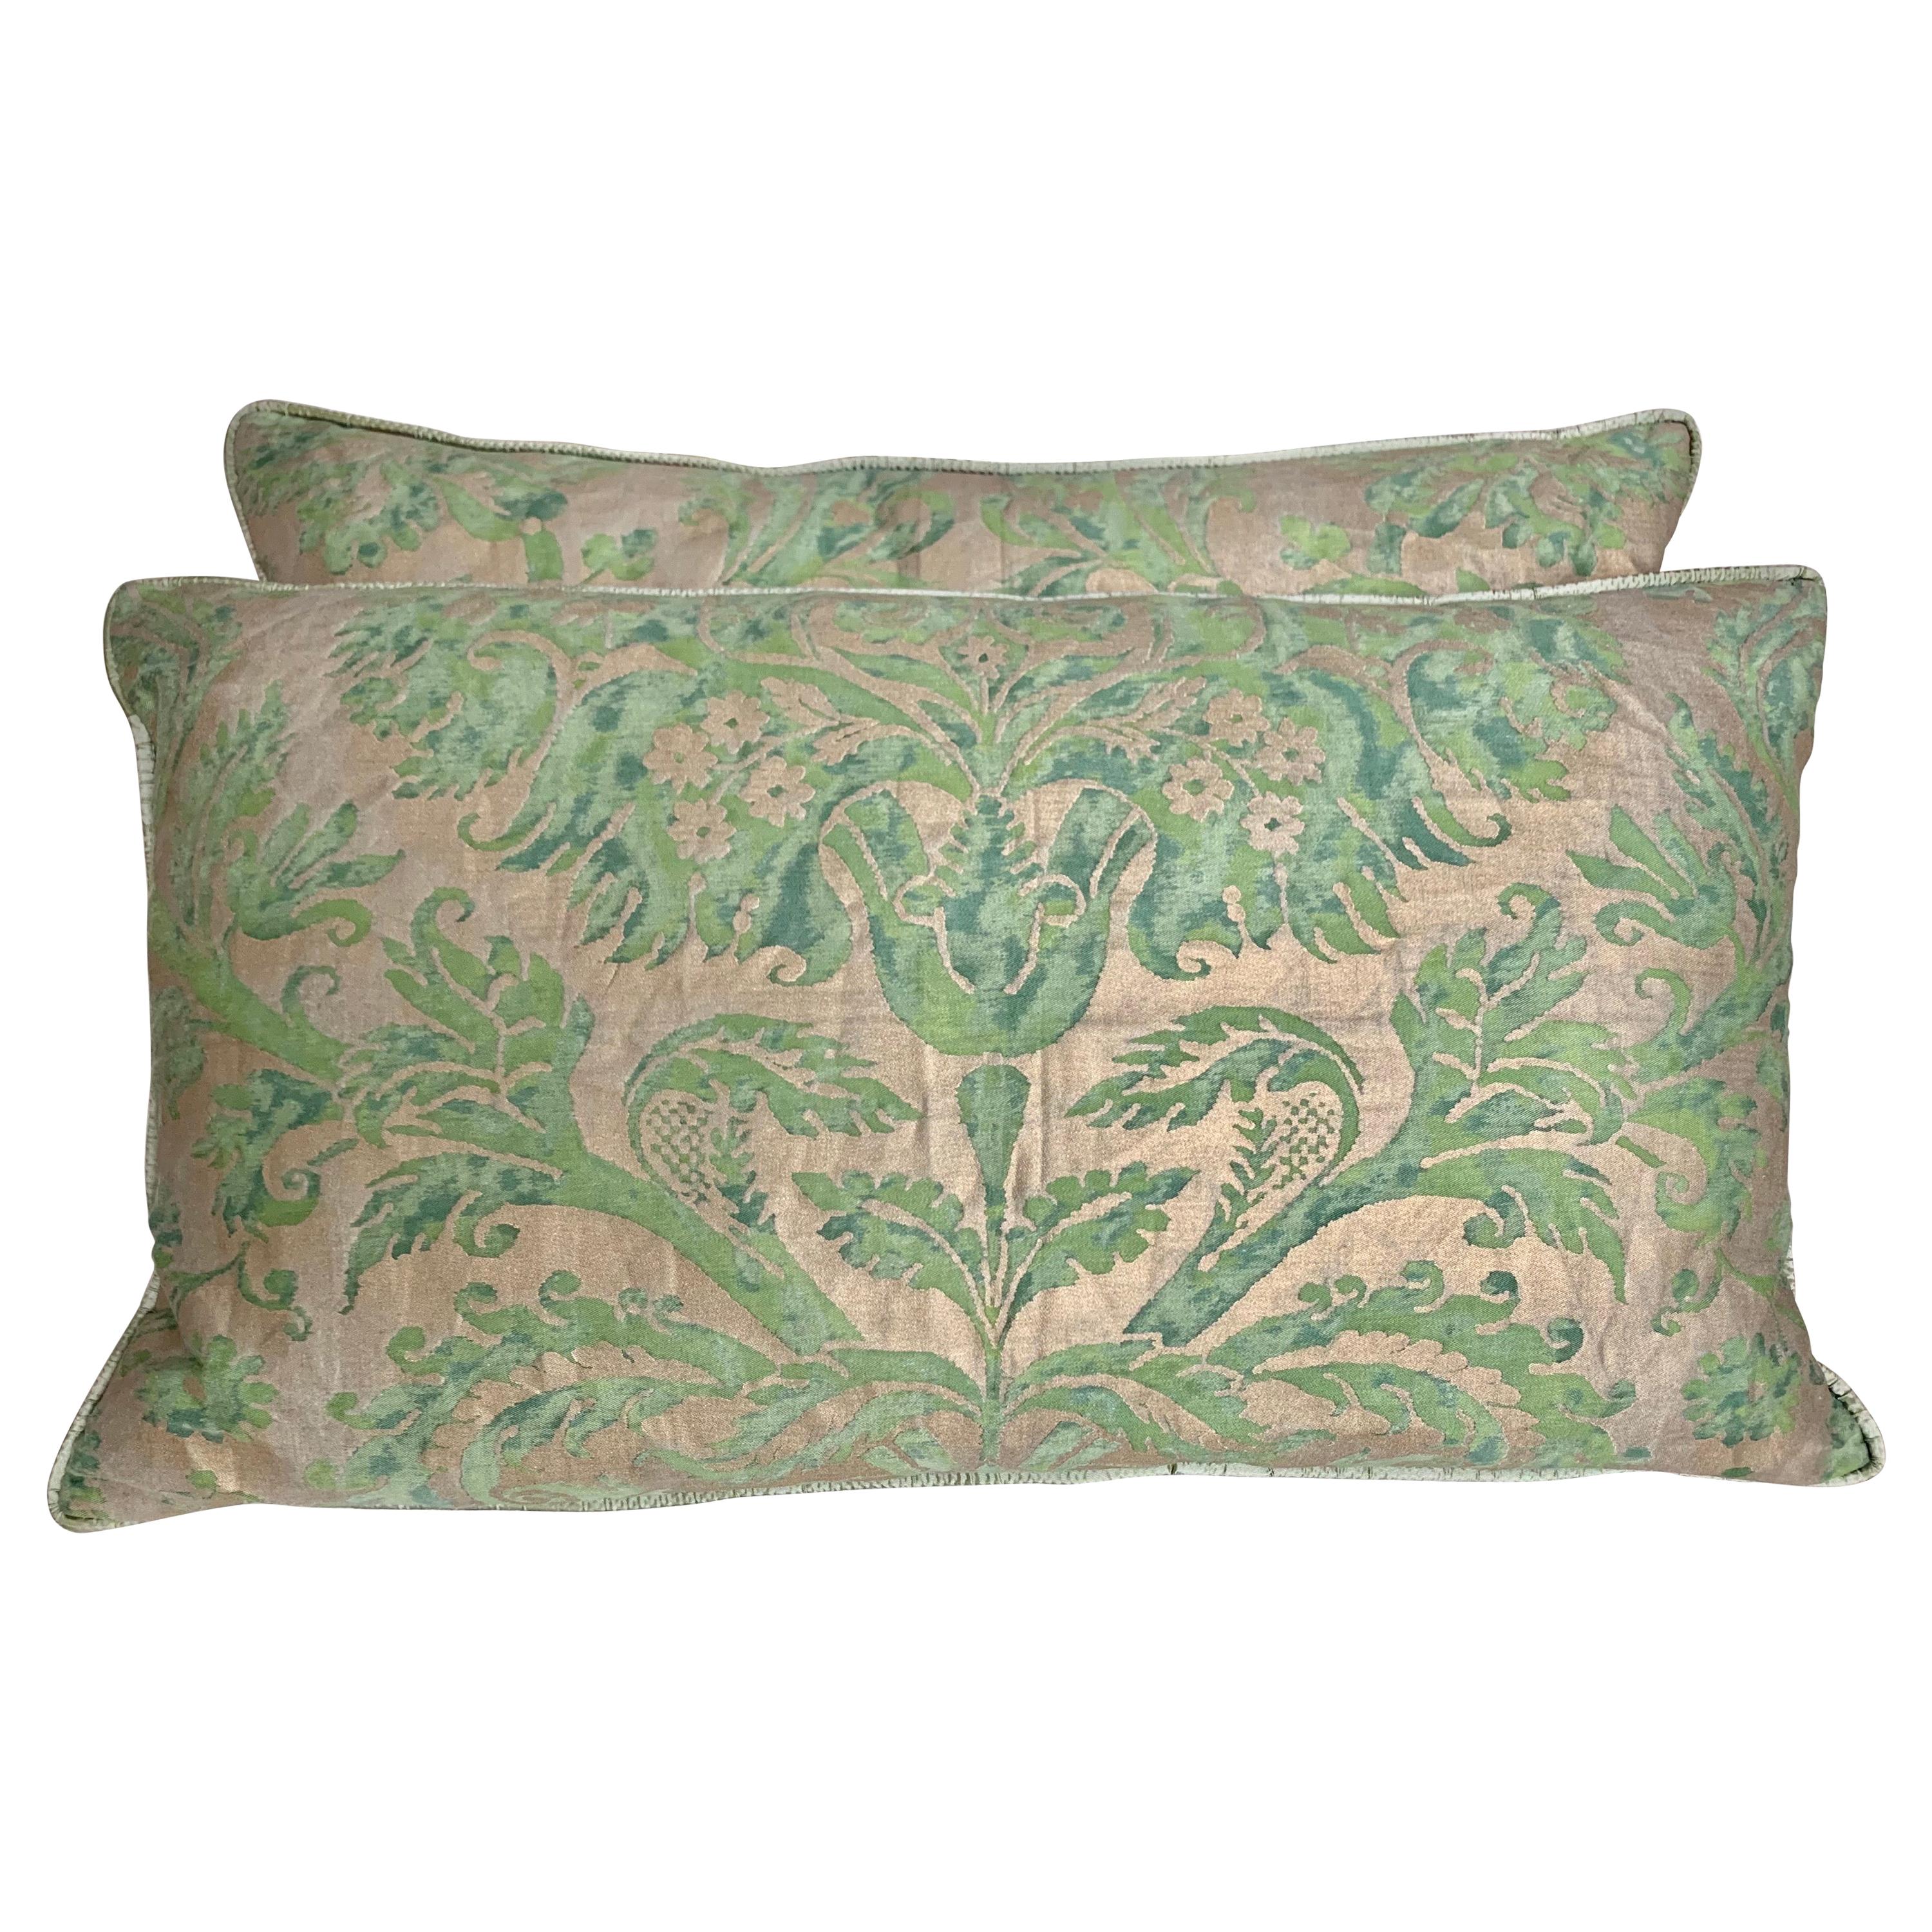 Pair of Unique Blue & Green Custom Fortuny Pillows